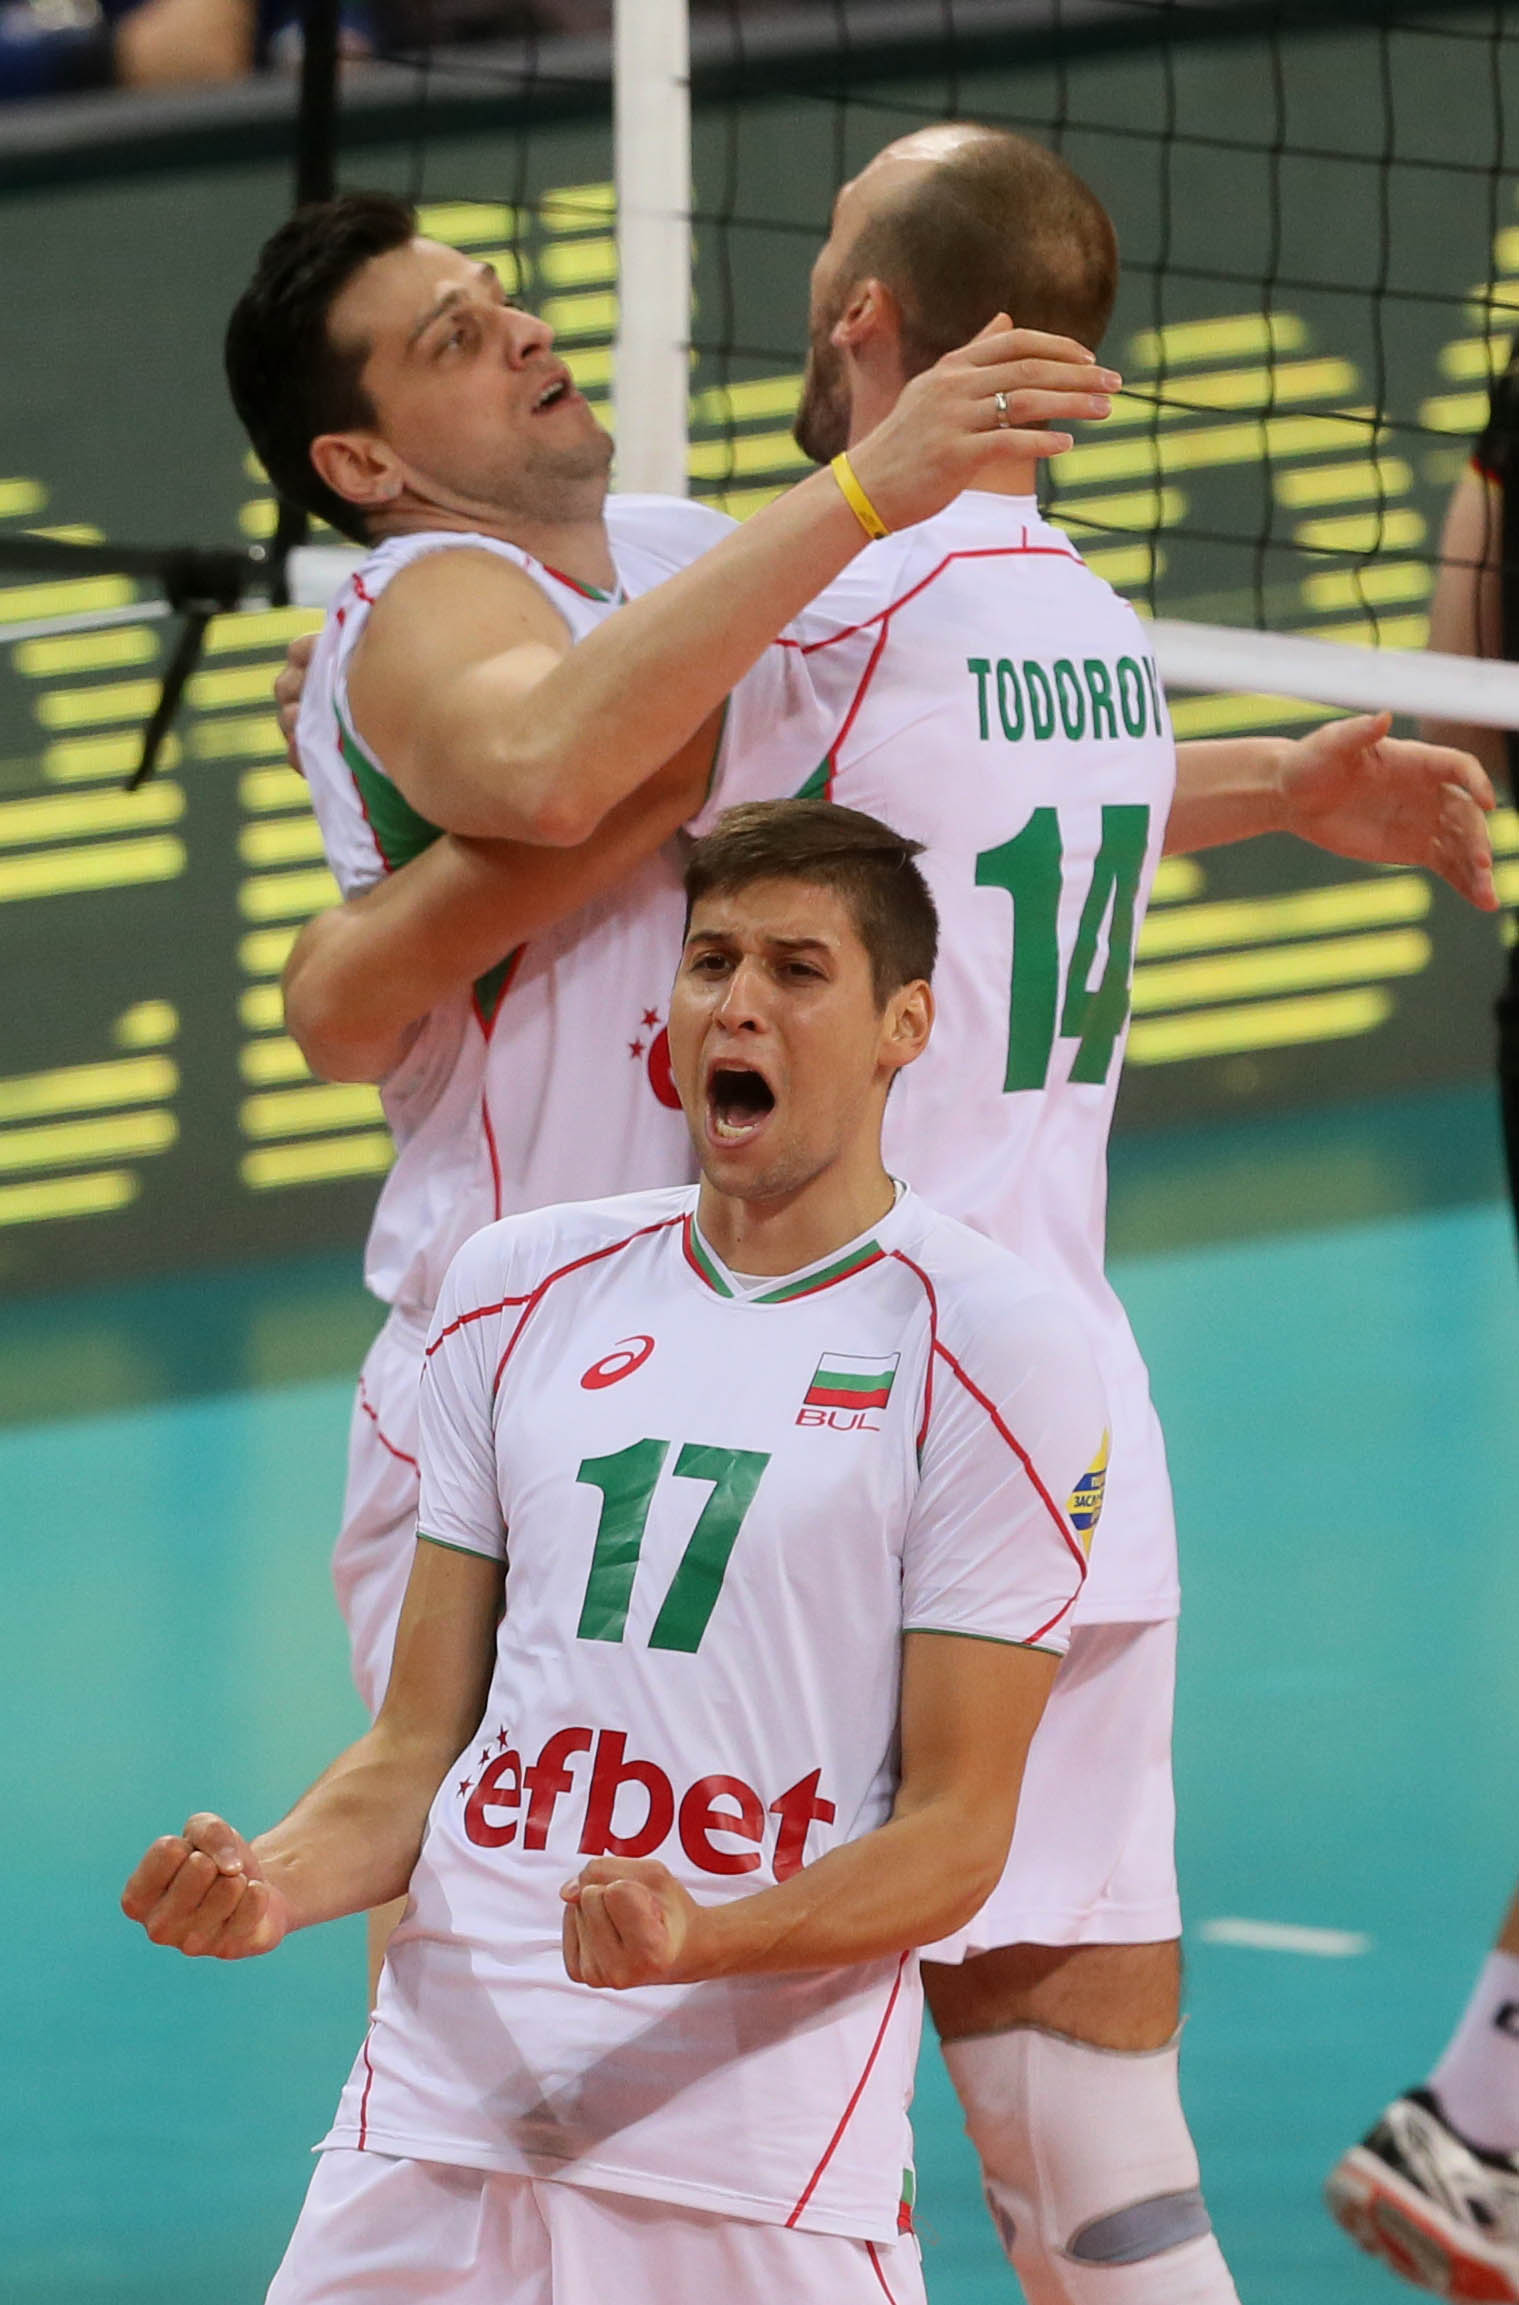 eurovolley 2015 cev european championship pictures and videos 2